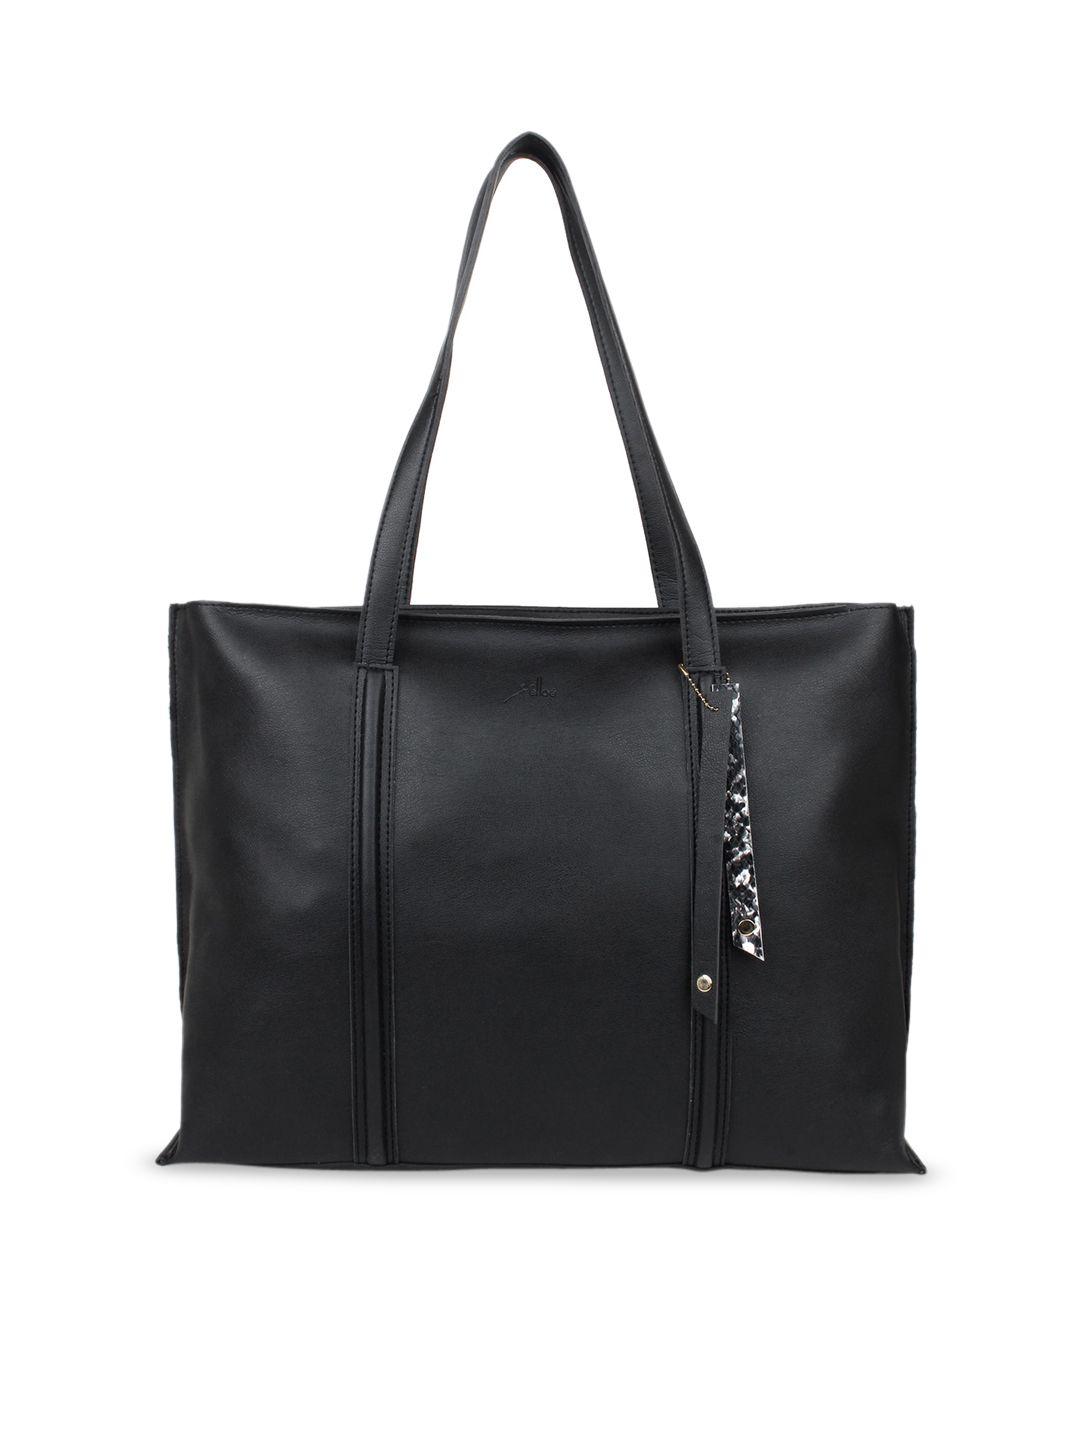 yelloe-black-solid-structured-laptop-tote-bag